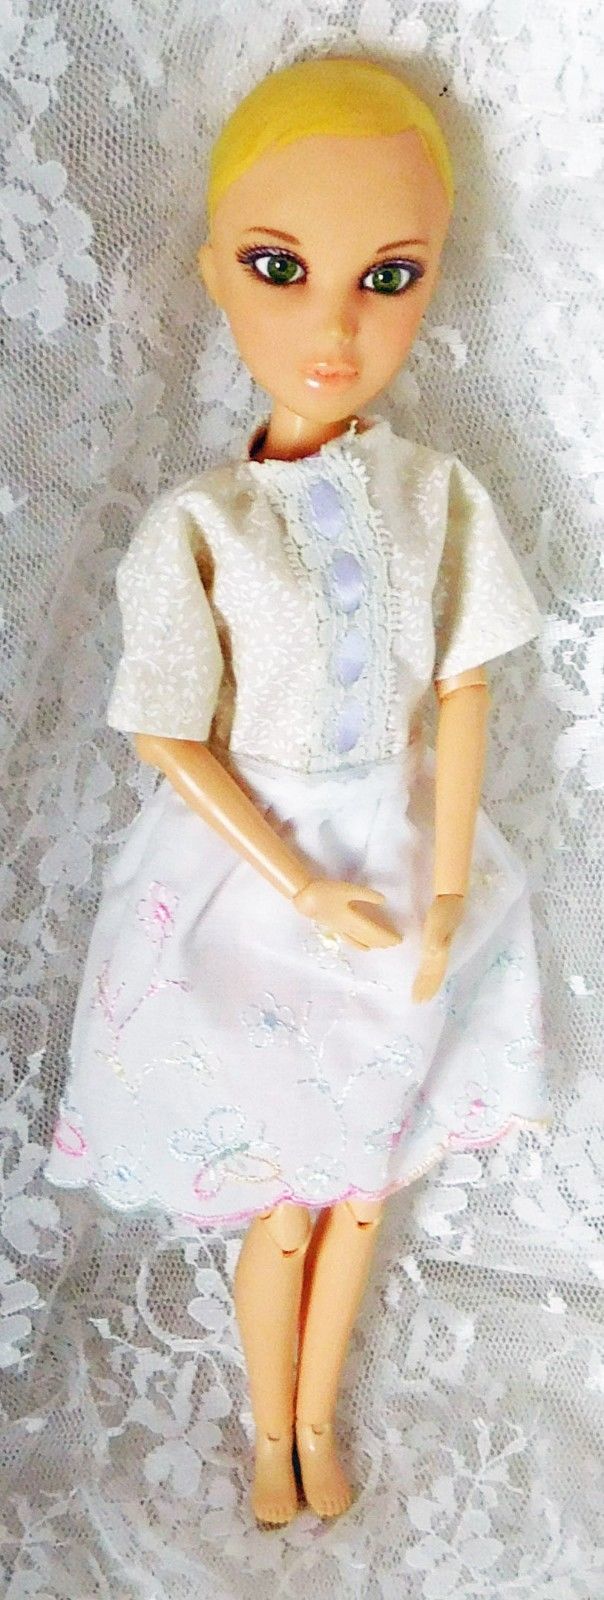 2009 Spin Master Ltd LIV 11 1/2" Doll #00621SWMG - Articulated - Handmade Outfit - £9.74 GBP